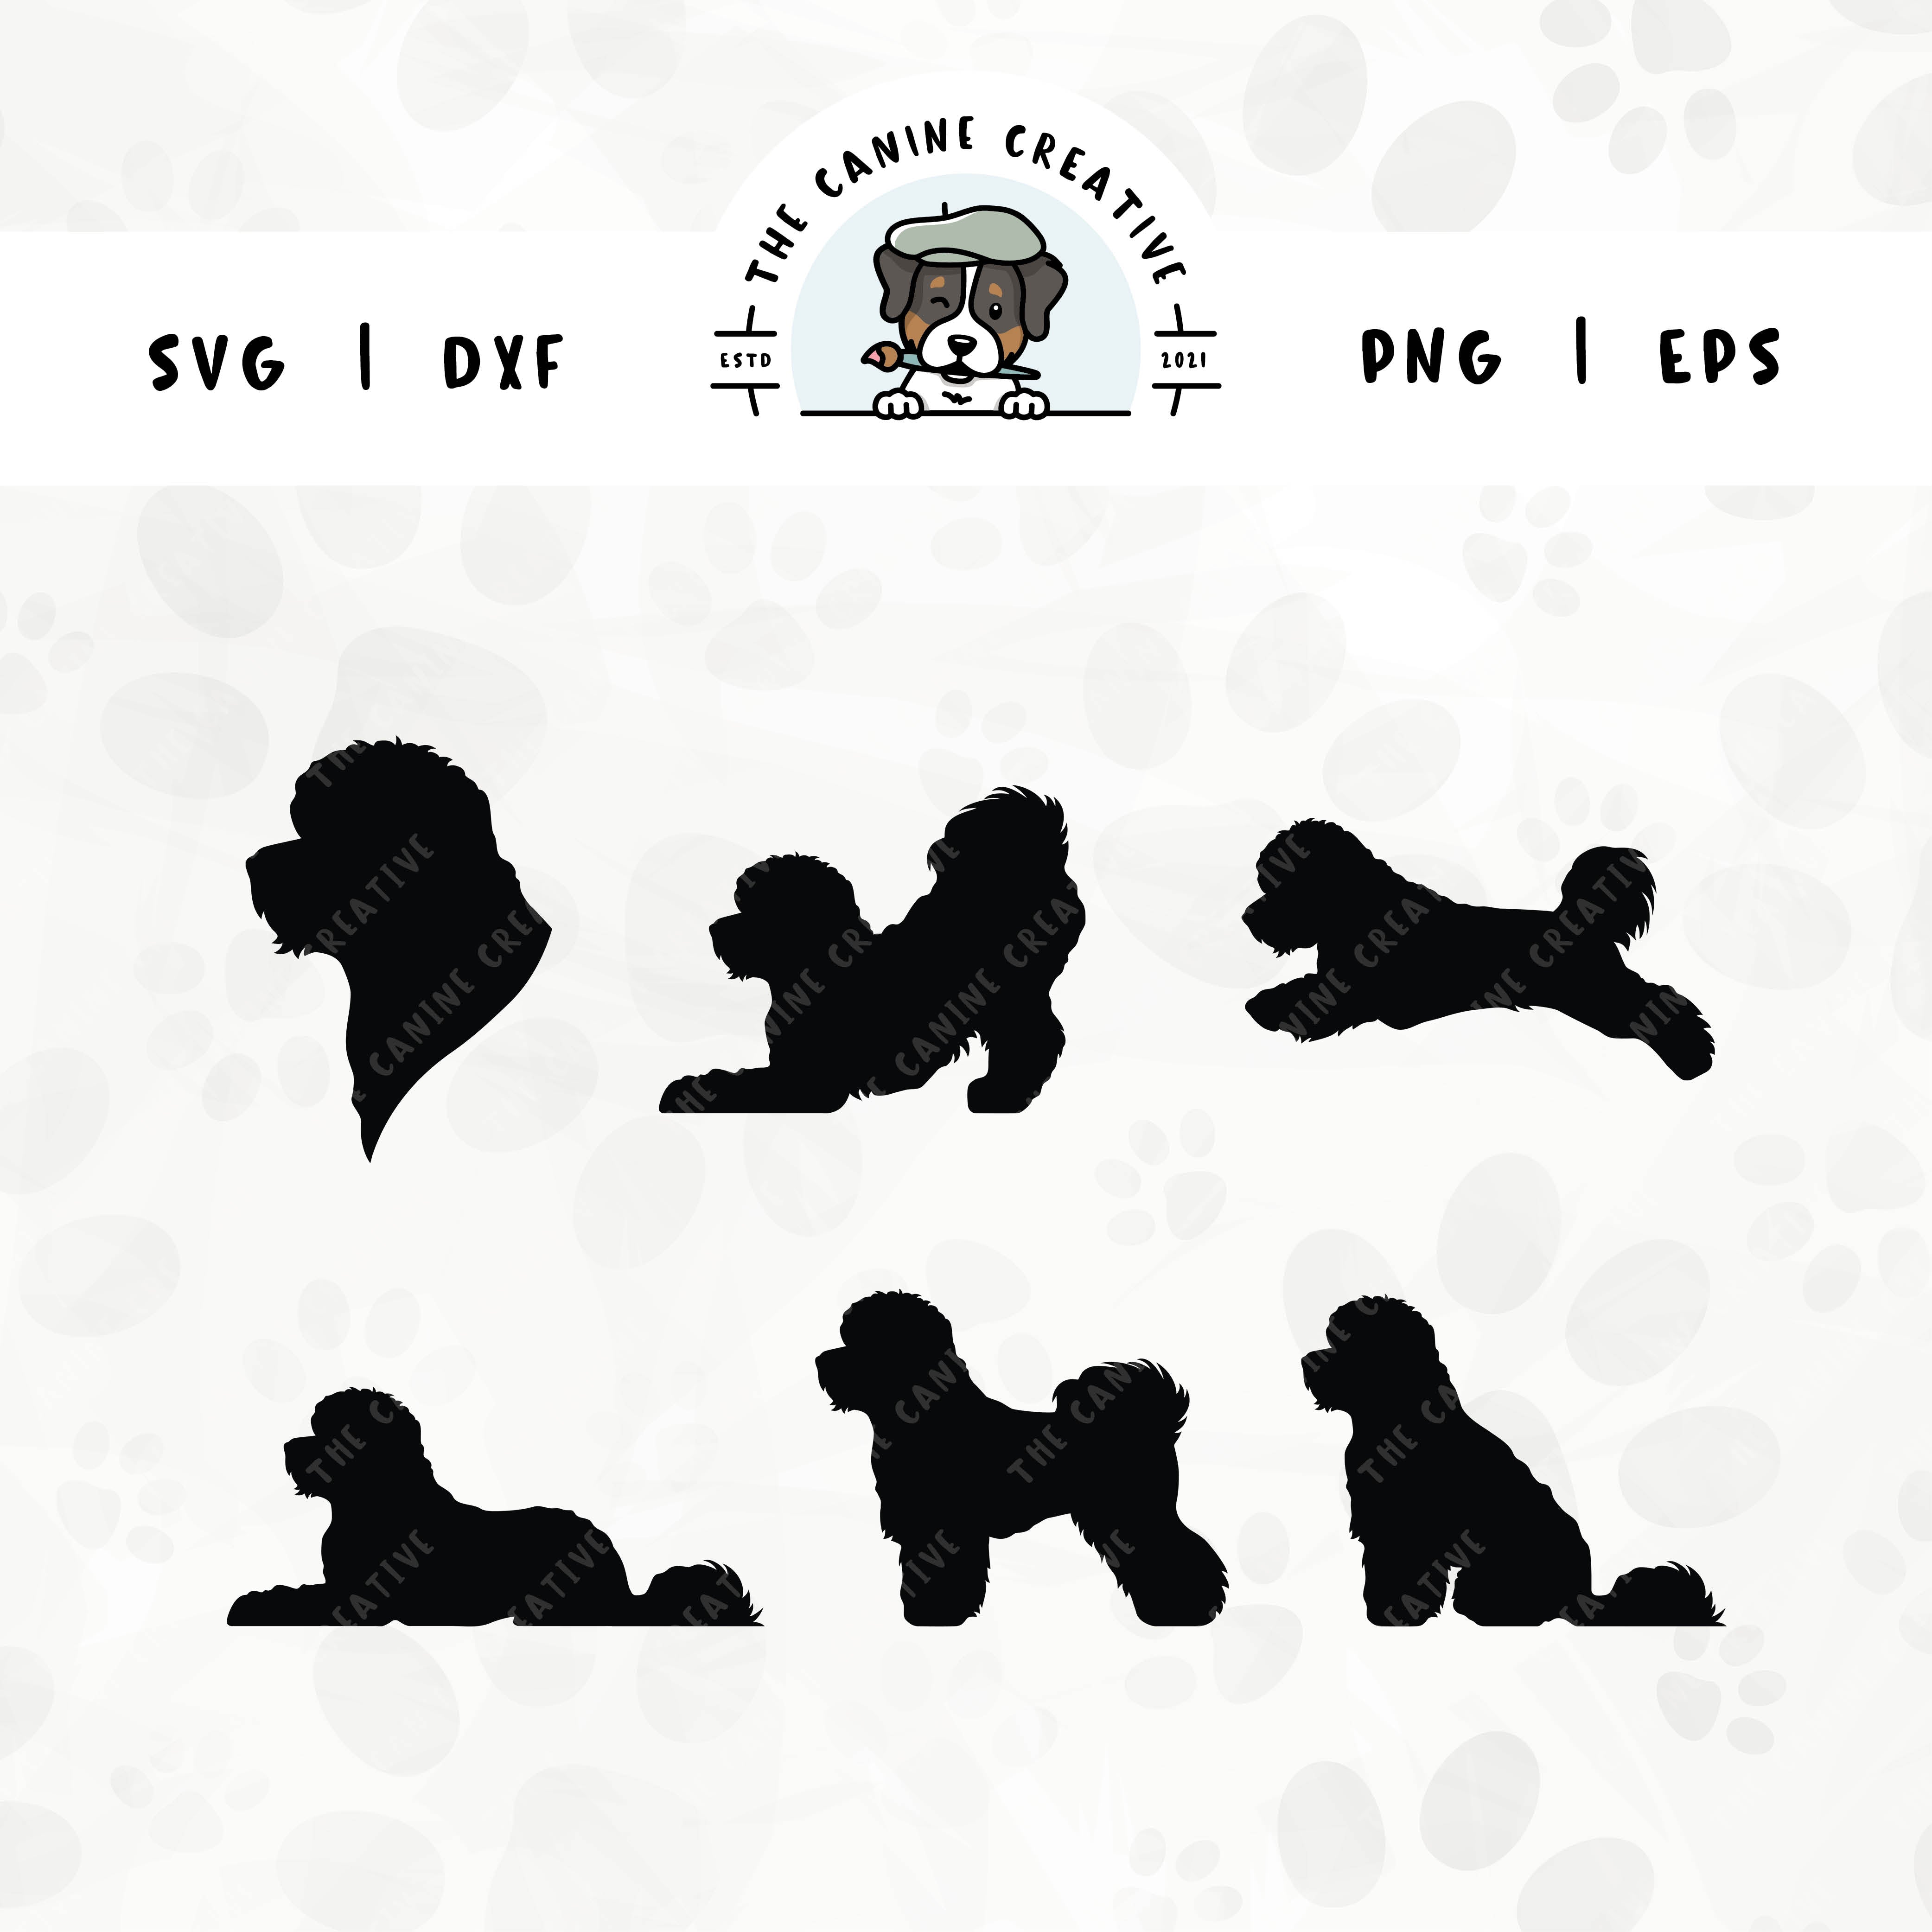 This 6-pack Bichon Frise silhouette bundle (set 1) features a dog's head in profile, along with various poses including running, laying down, playing, standing, and sitting. File formats include: SVG, DXF, PNG, and EPS.